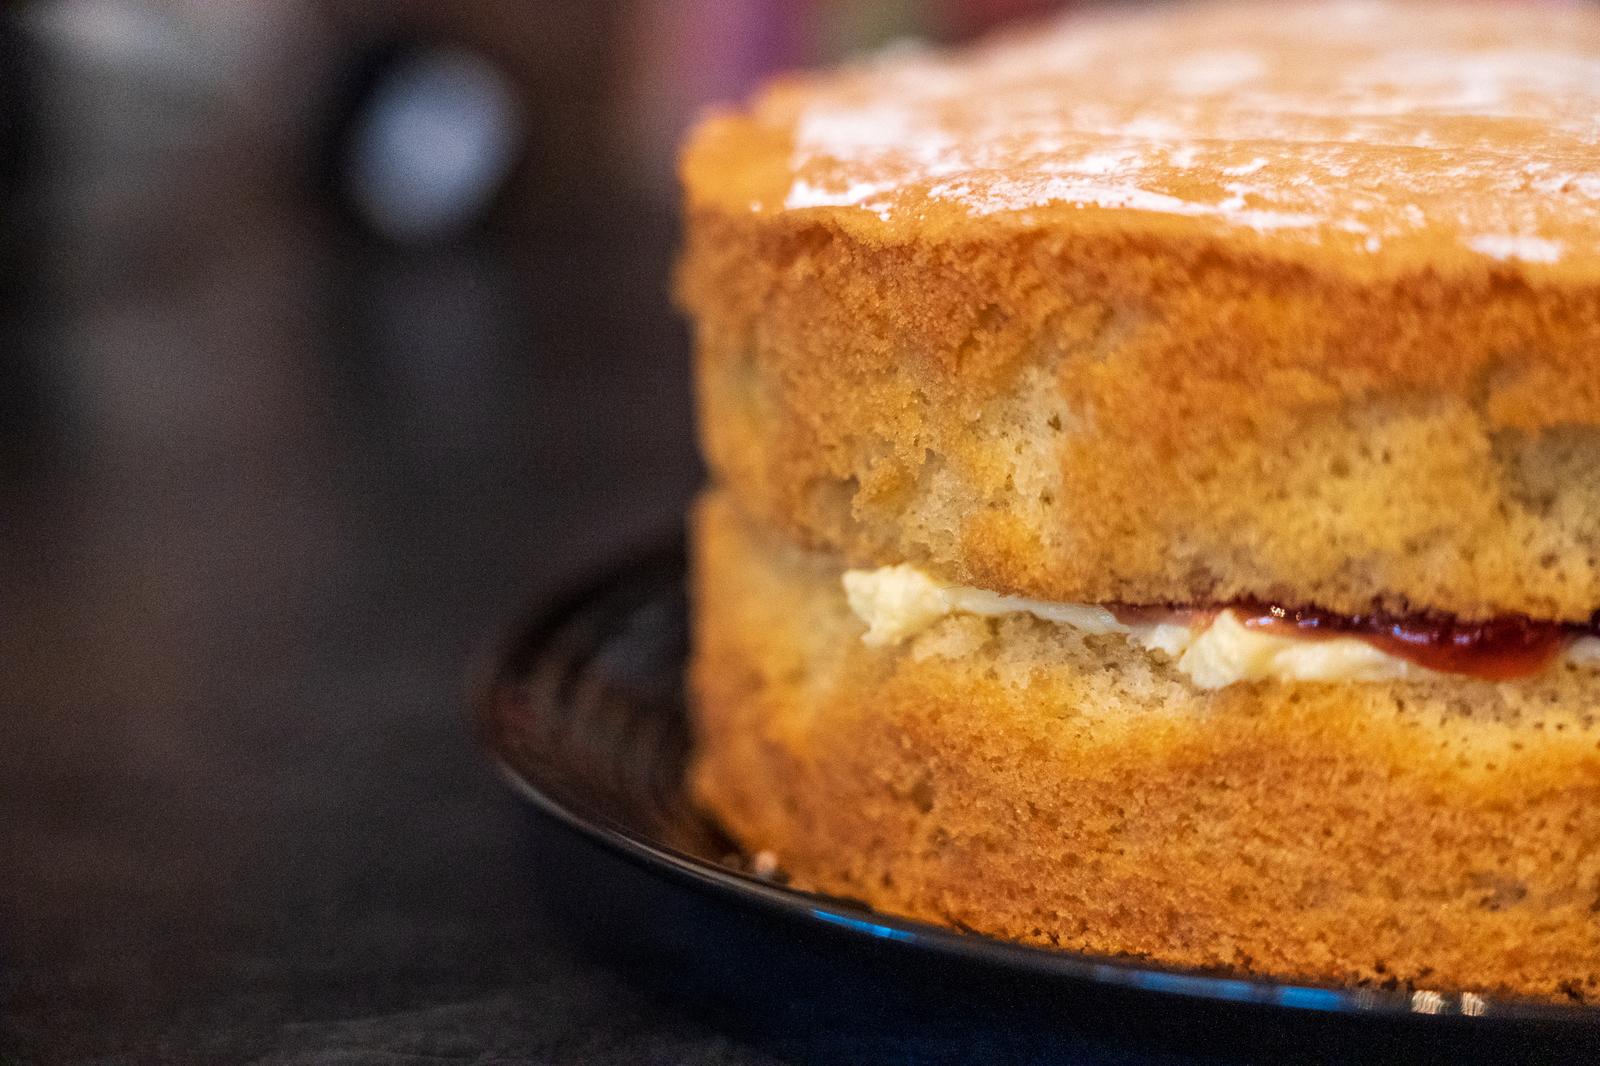 What Cake Matches Your Vibe? Victoria sponge cake